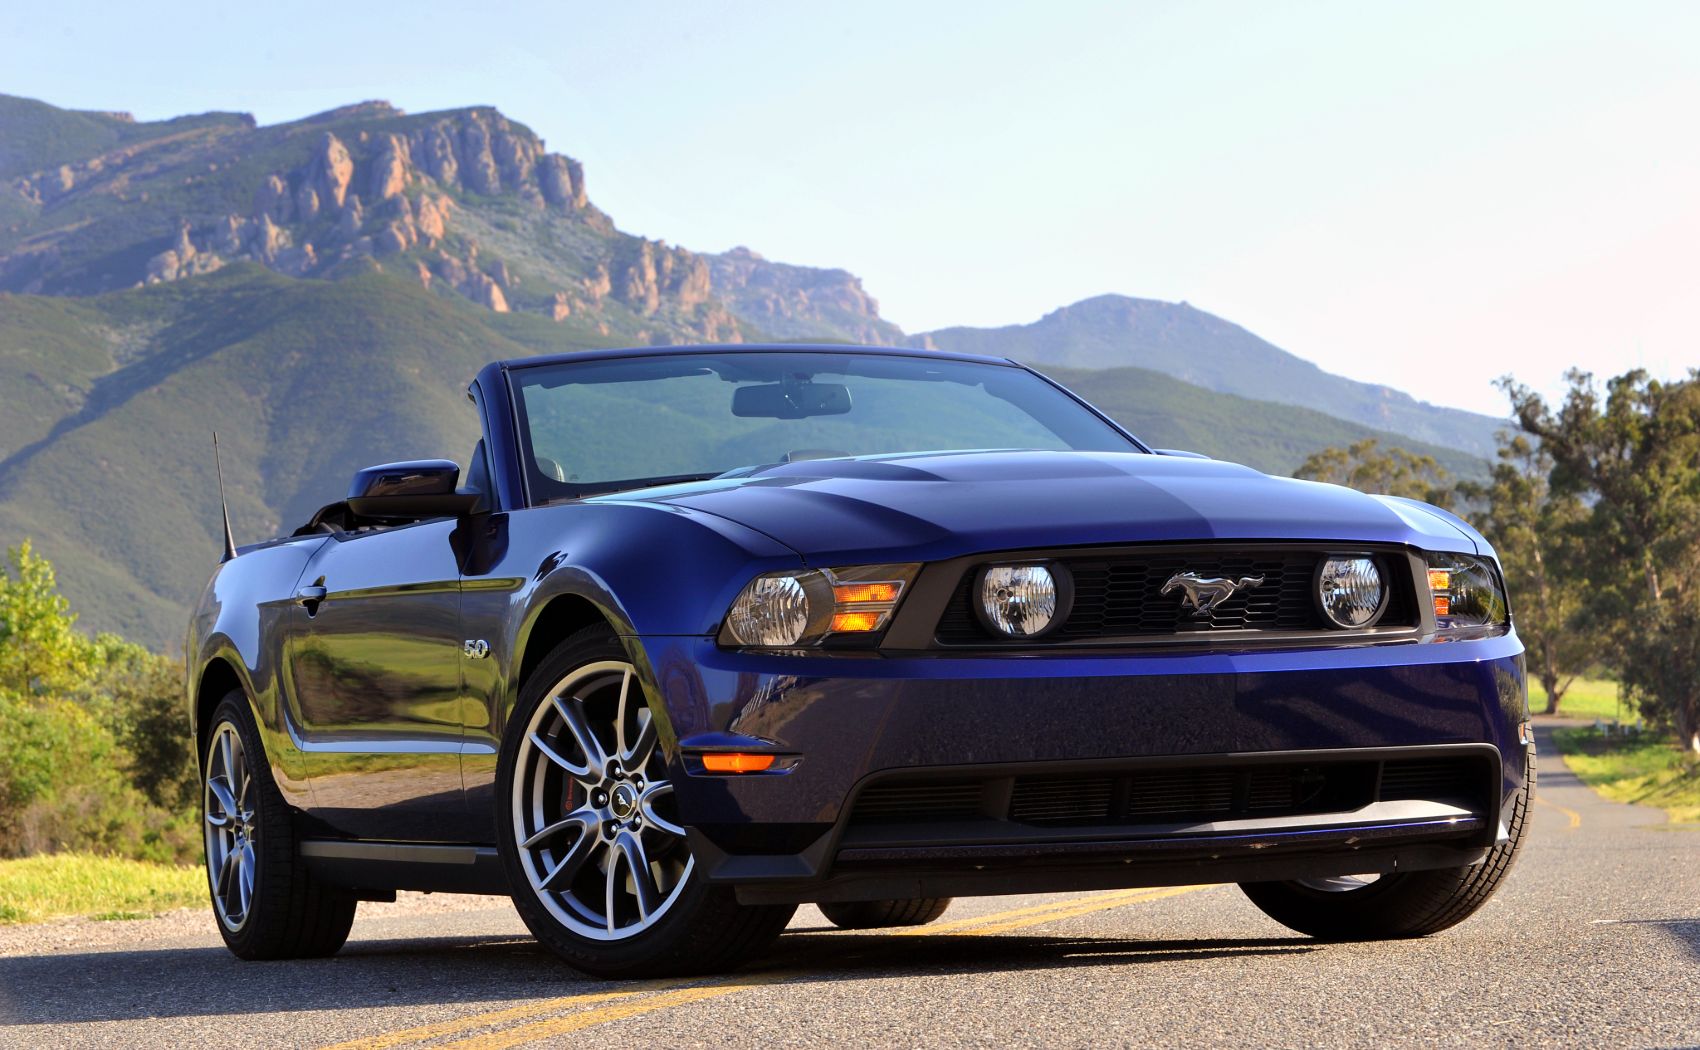 Looking To Buy a Used Fifth Generation Mustang? These Are the Most Issues - autoevolution